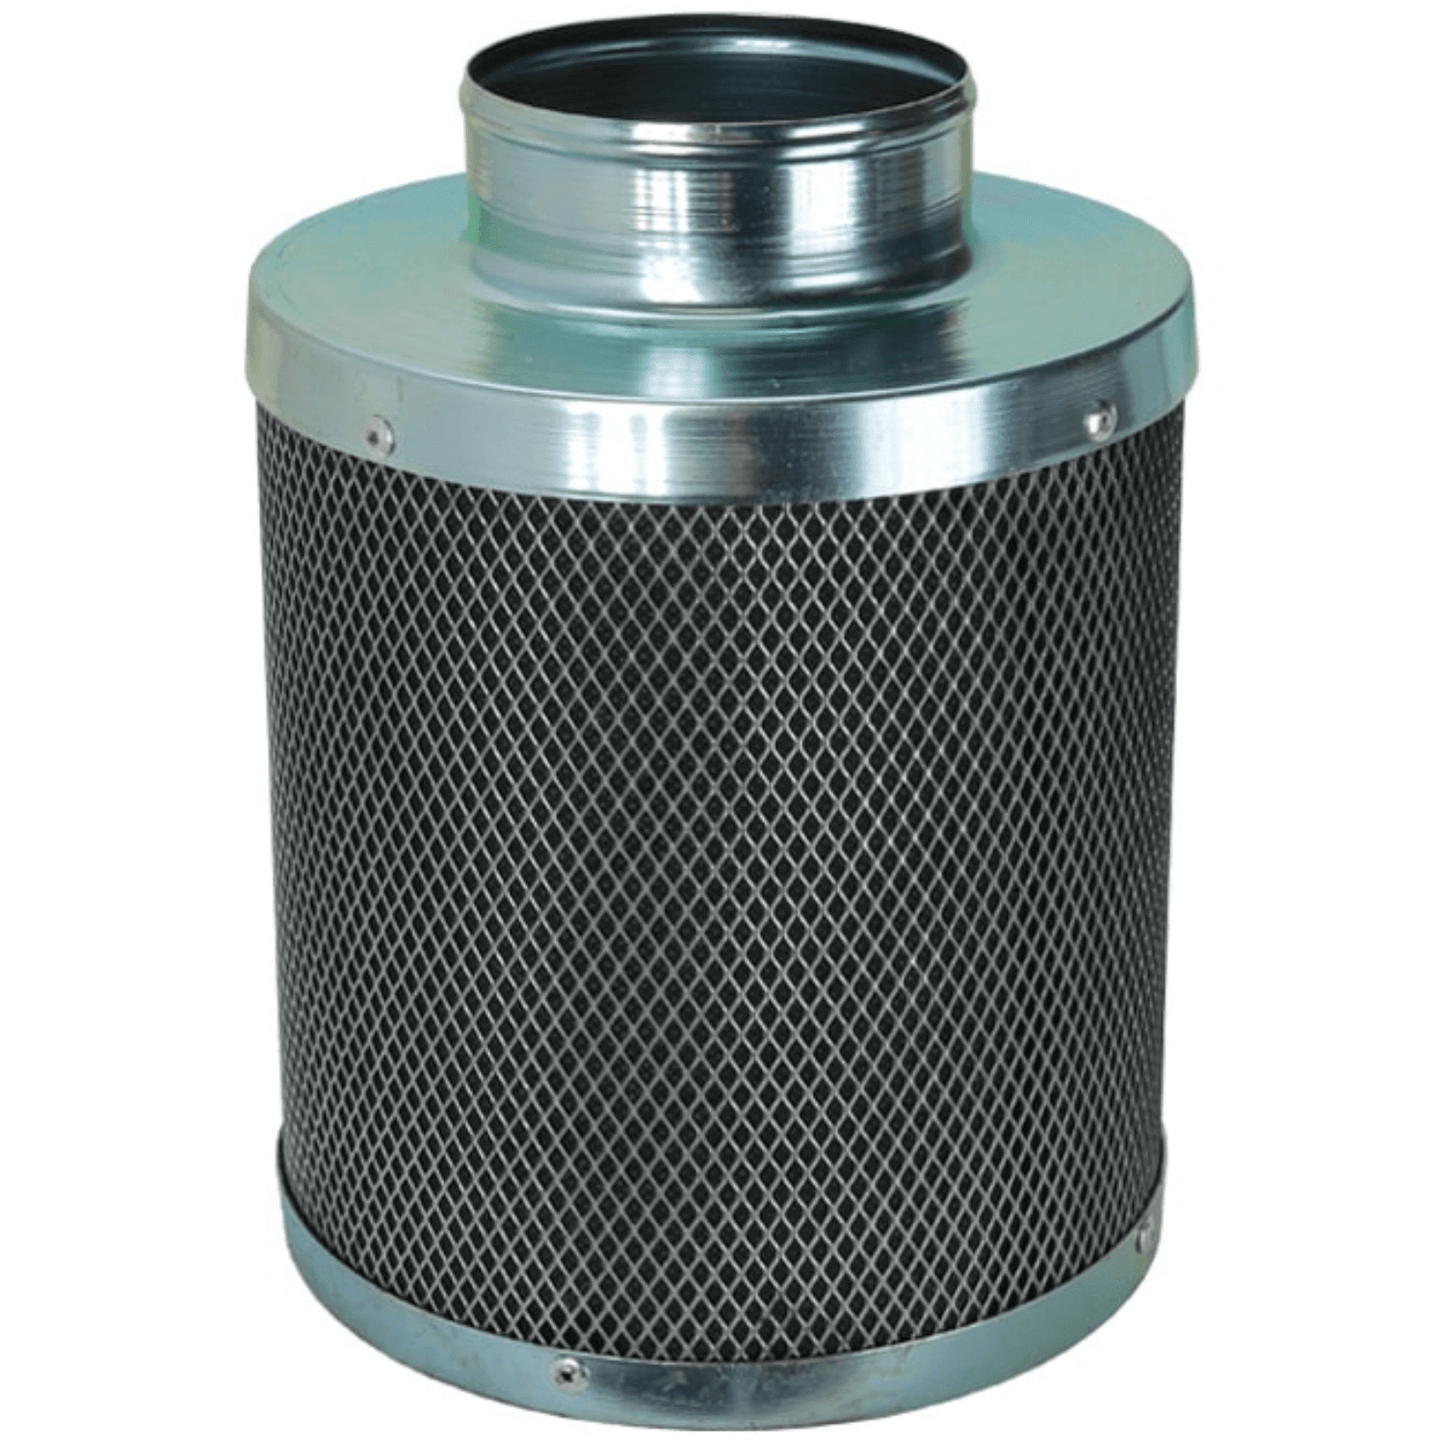 Charco Filters Plus 14" x 49" Activated Carbon Air Filter 971214-2 Climate Control 850009530738